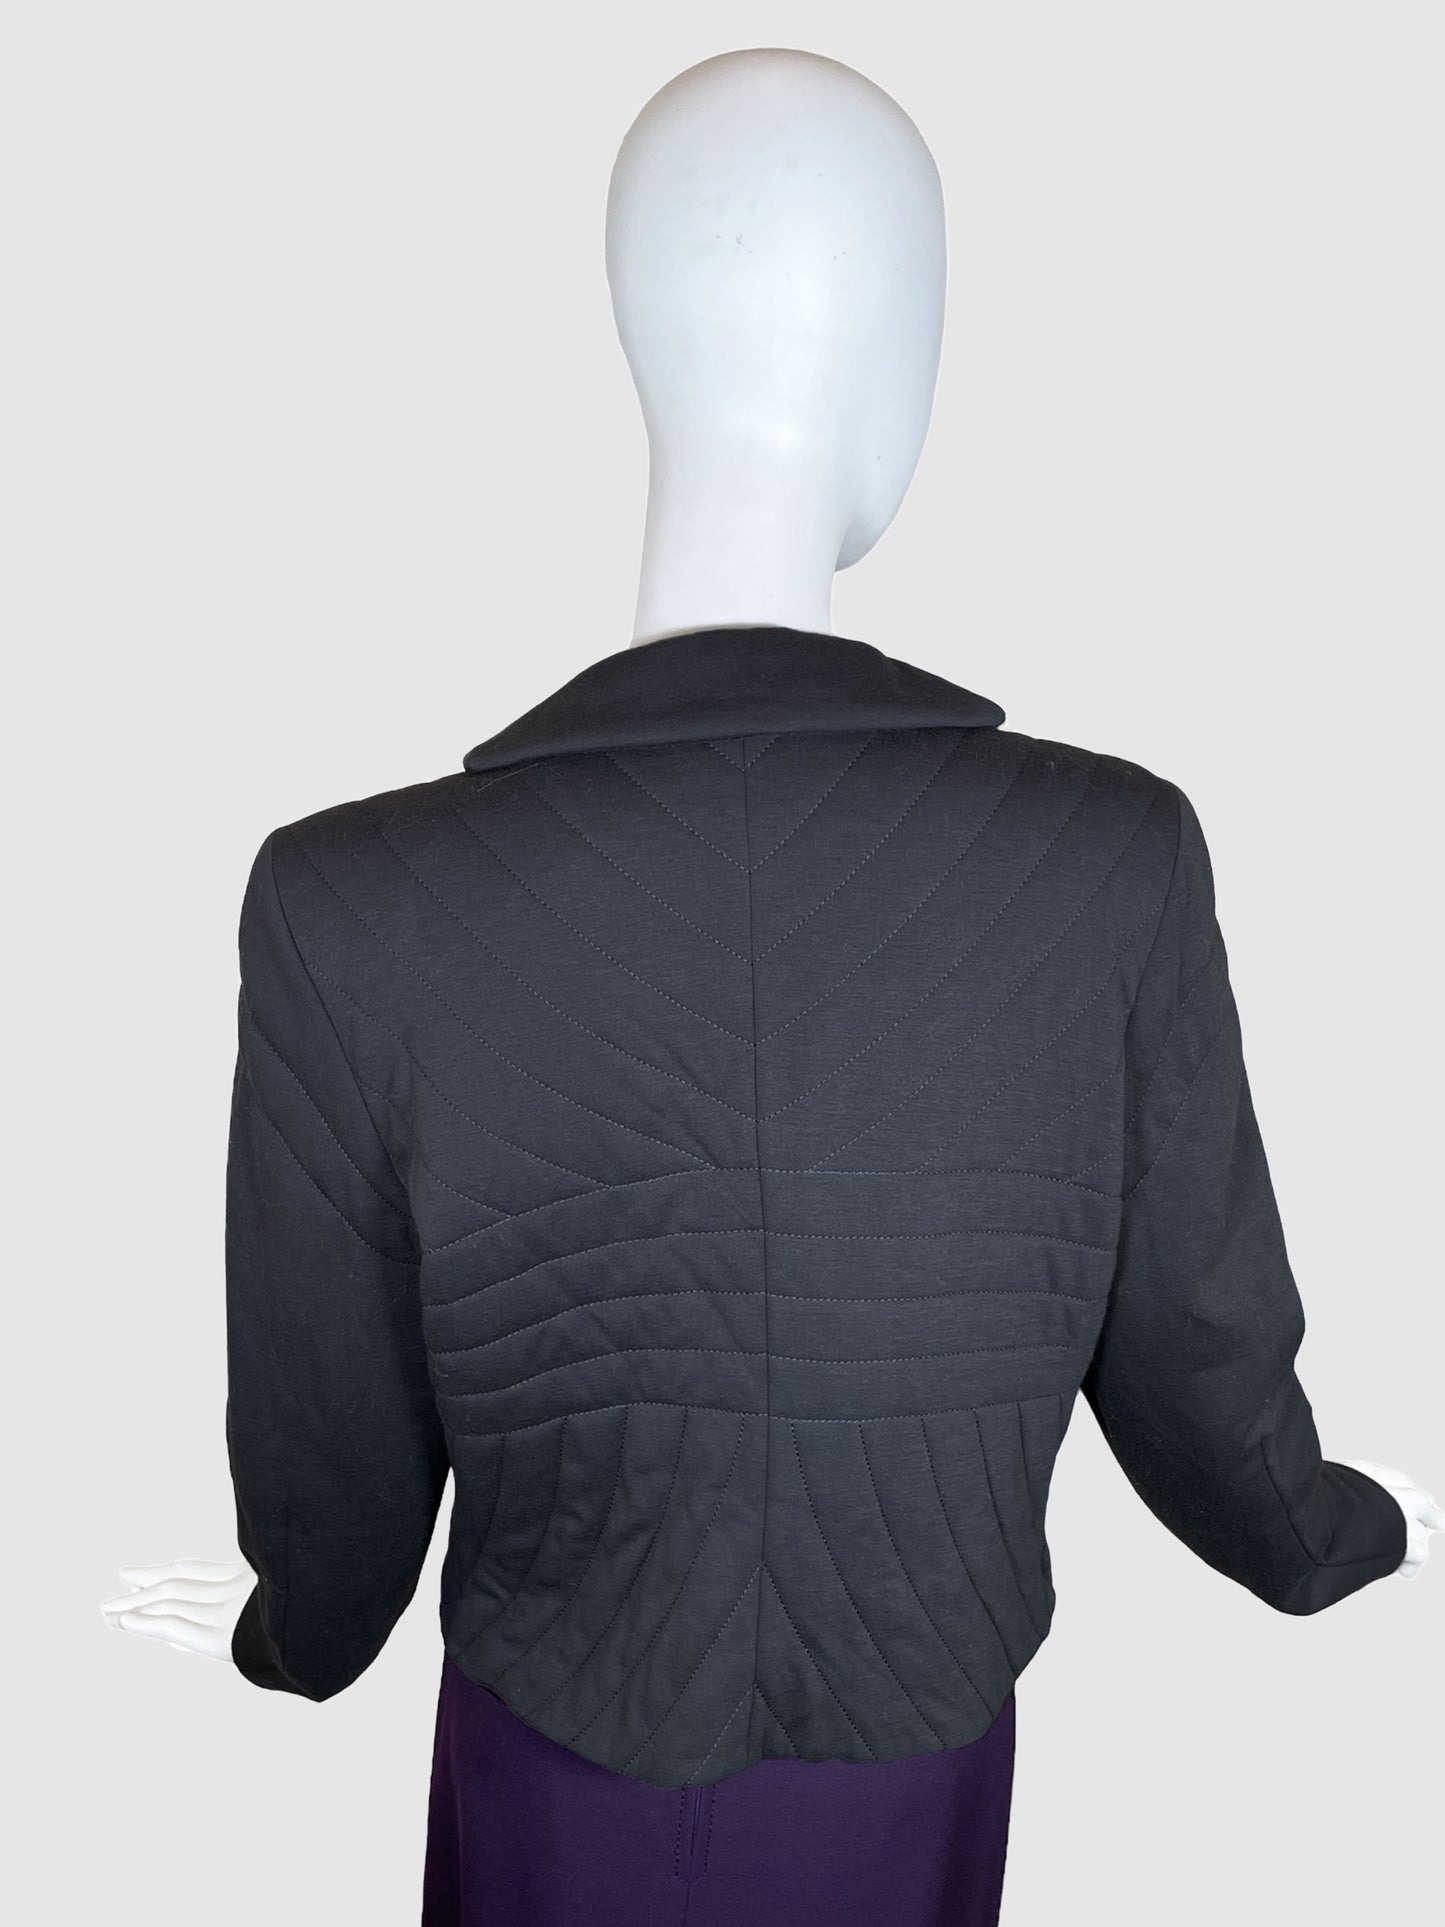 Giorgio Armani Quilted Jacket - Size 50